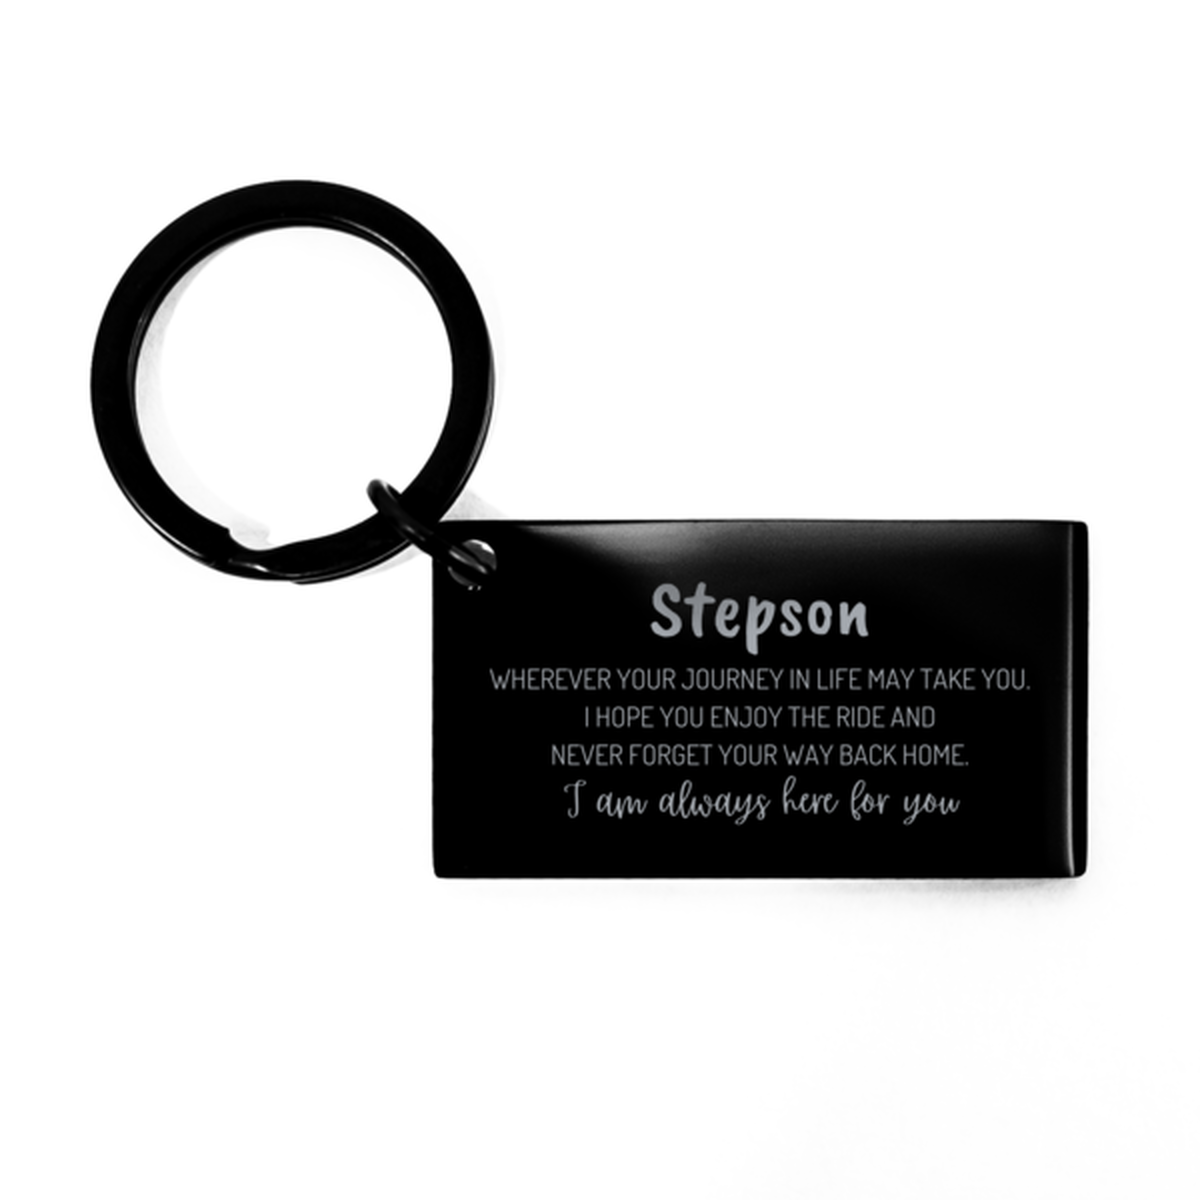 Stepson wherever your journey in life may take you, I am always here for you Stepson Keychain, Awesome Christmas Gifts For Stepson, Stepson Birthday Gifts for Men Women Family Loved One